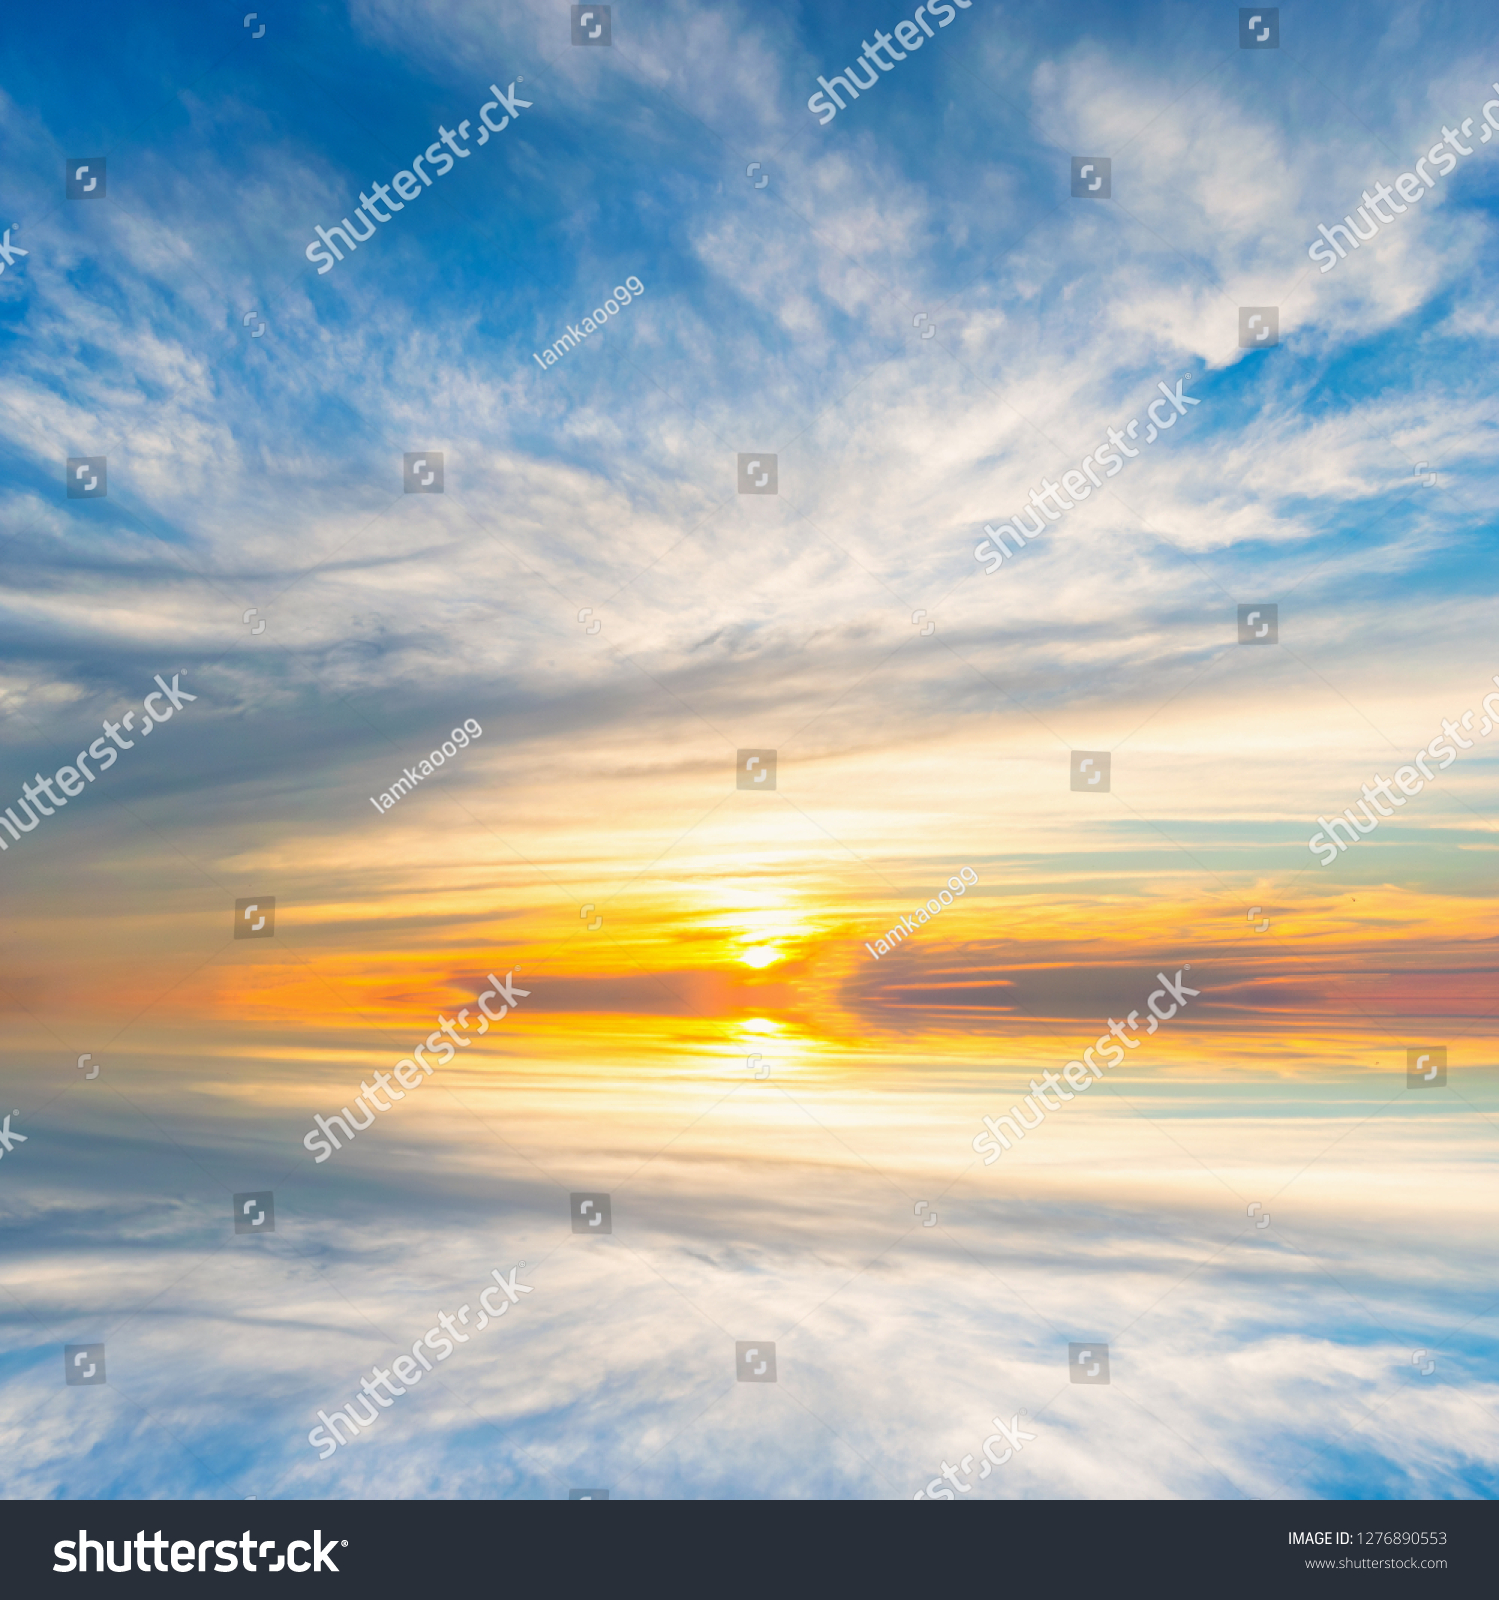 Background sky during sunset and water reflections #1276890553